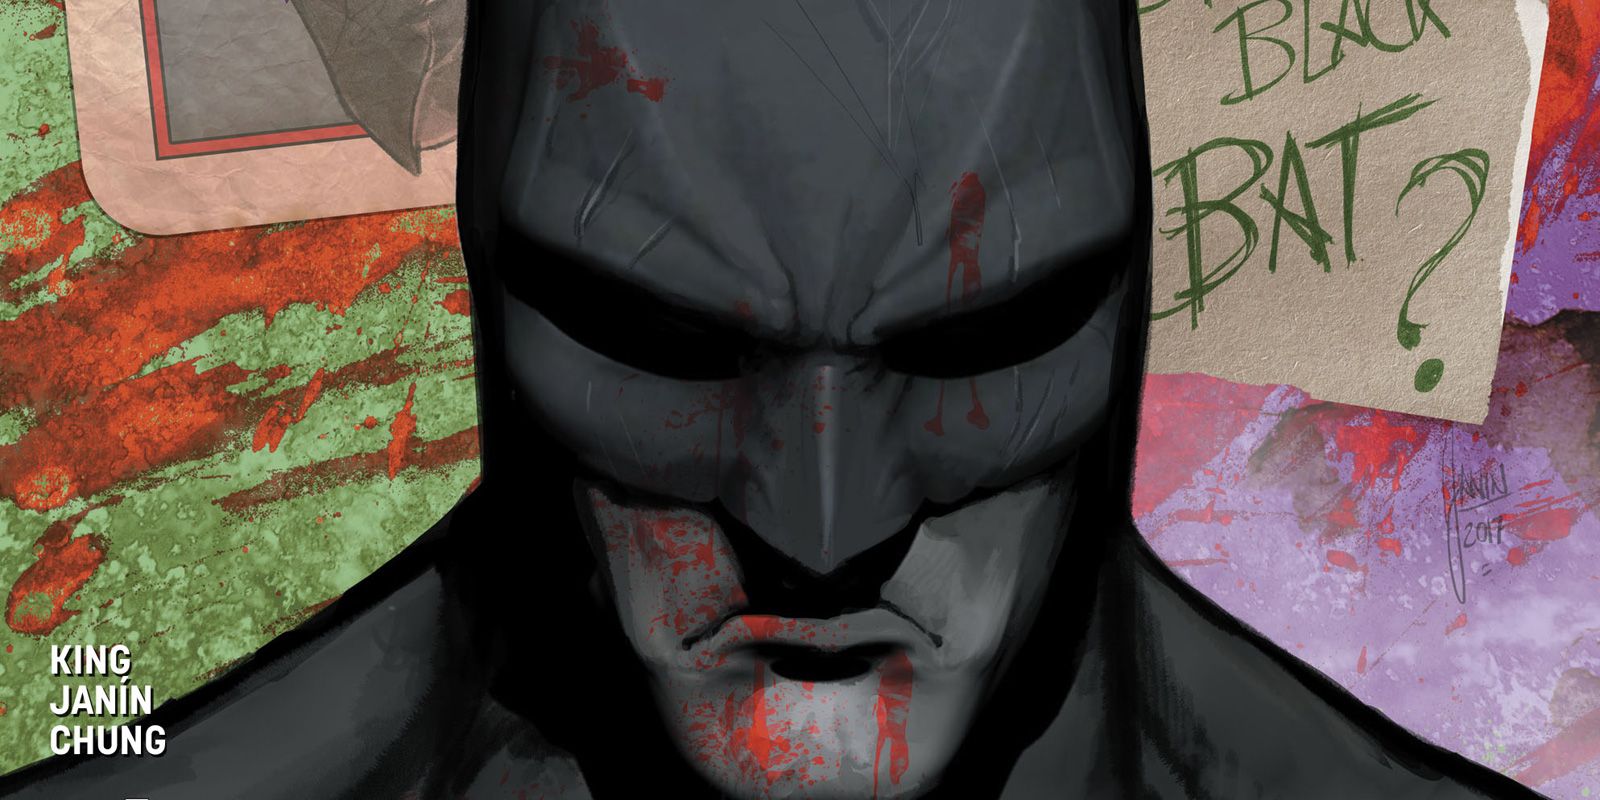 Batman #25 Review: Beautifully Crafted Issue Teases Big Things To Come